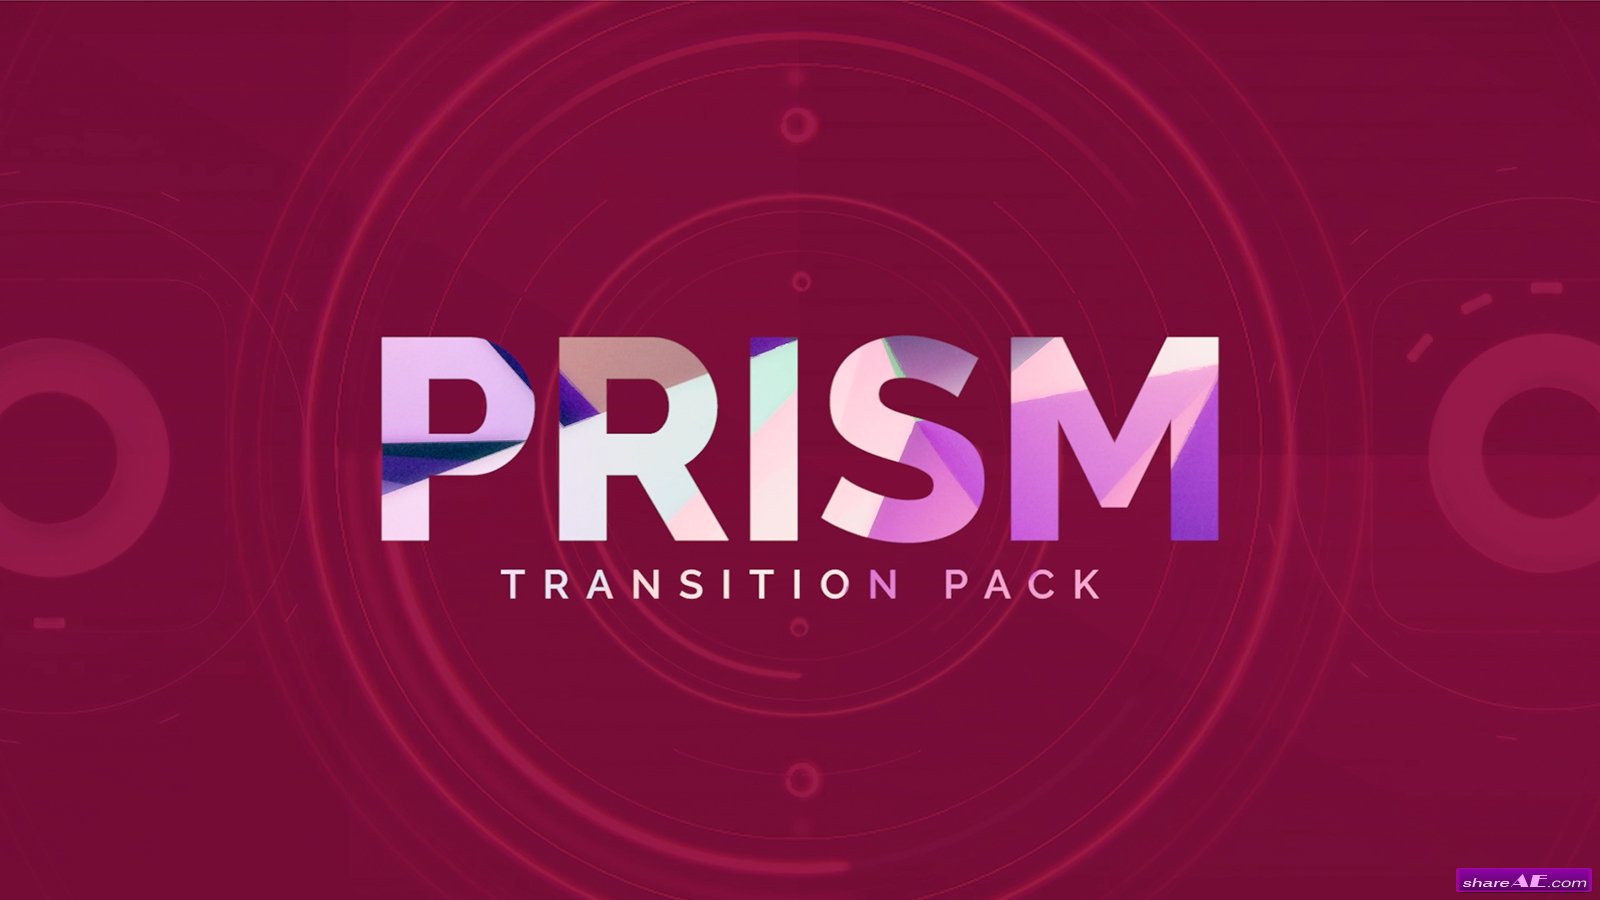 Prism - 200 High-Energy Transitions - After Effects Template (RocketStock)